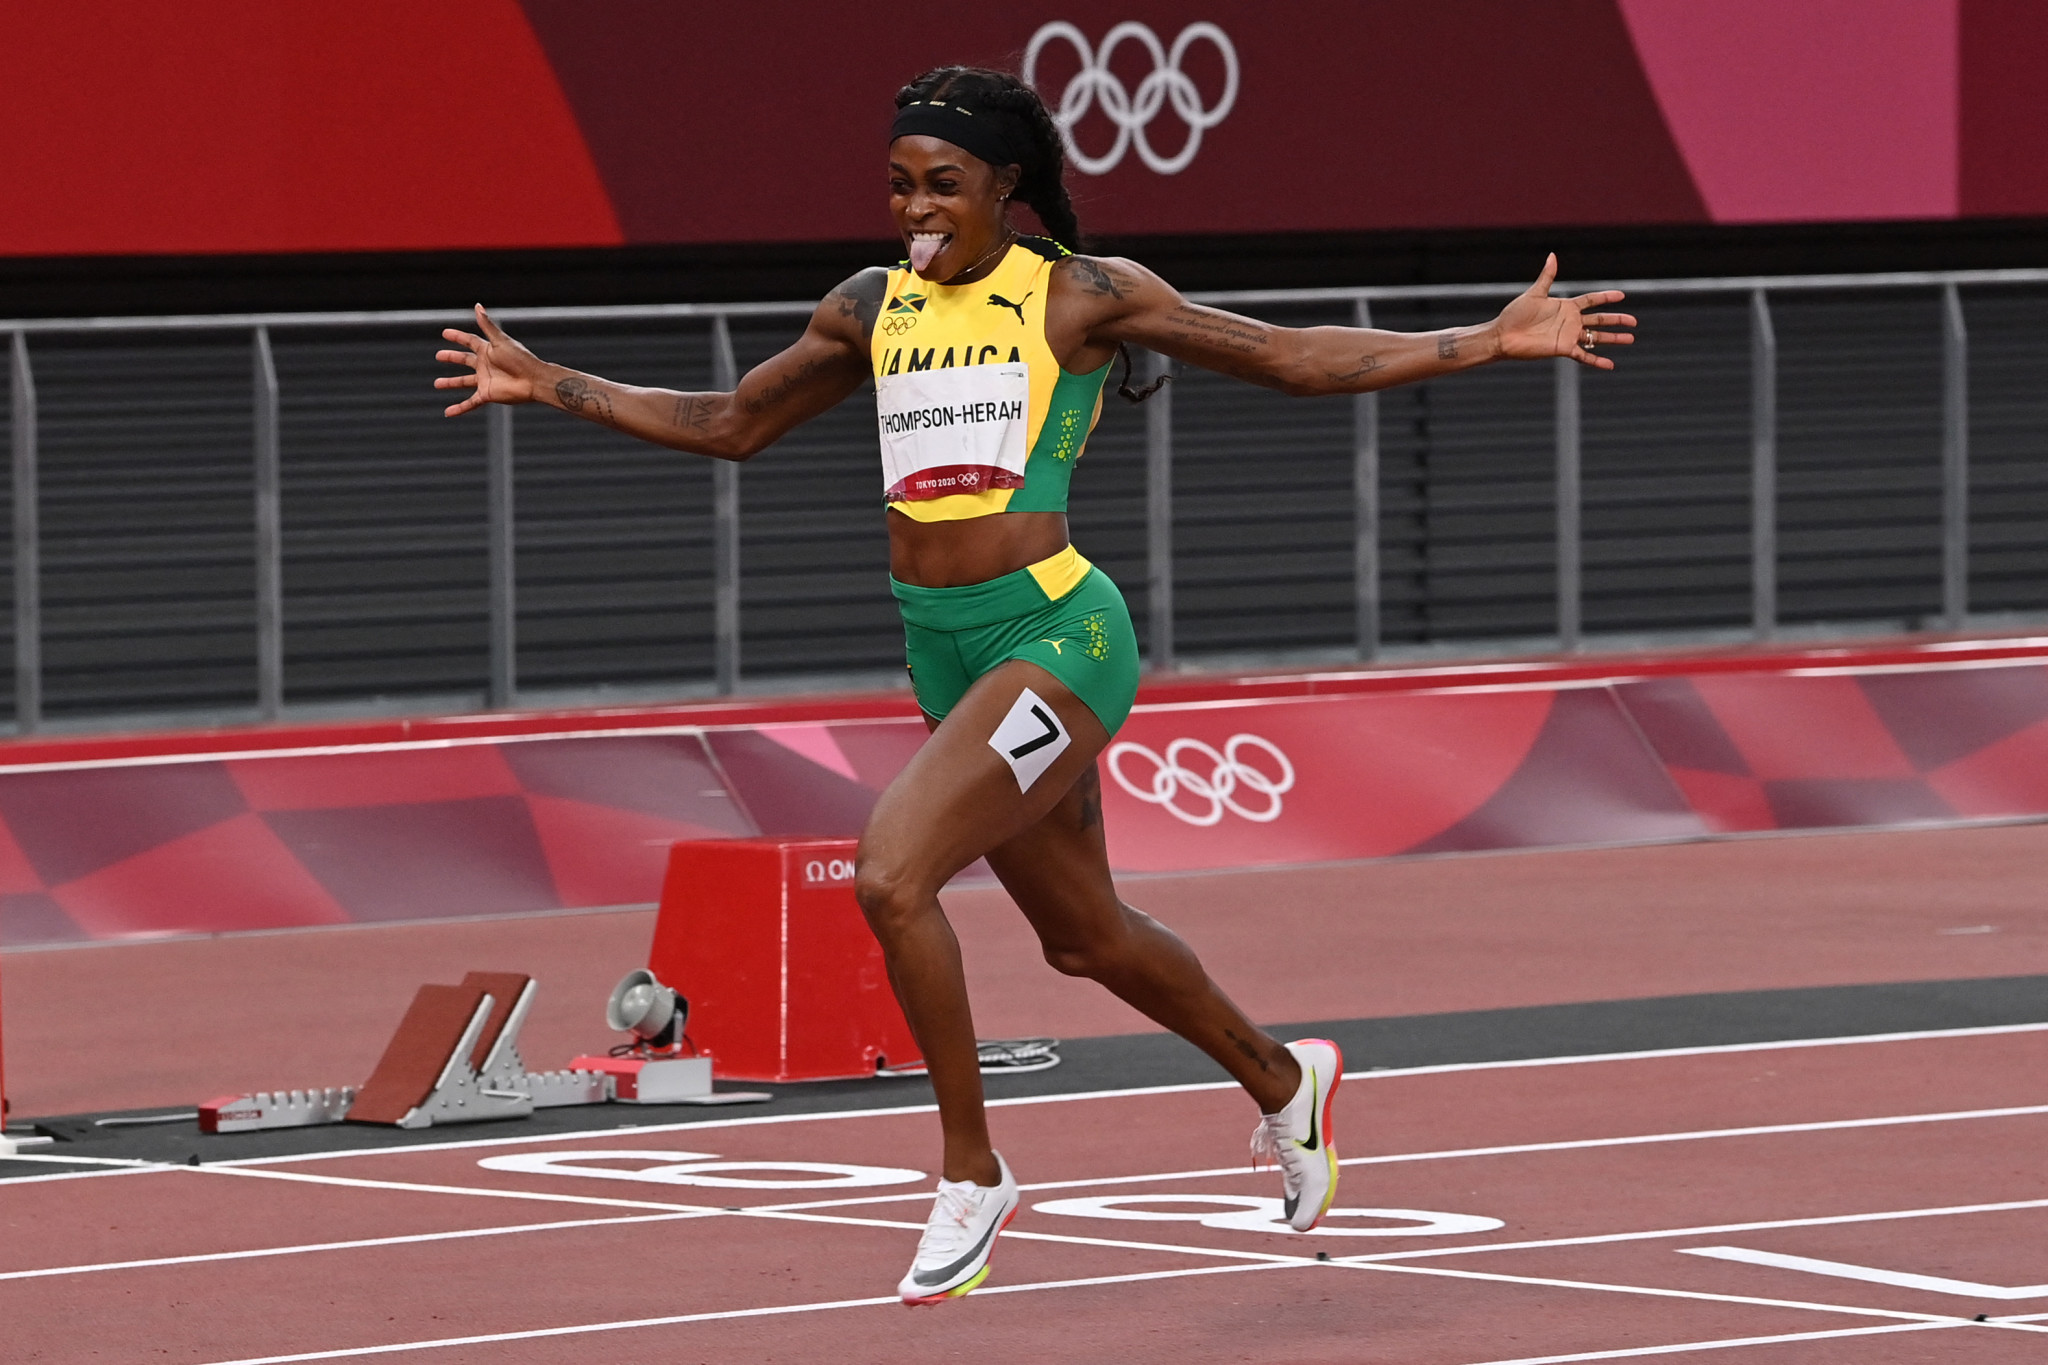 Jamaica's Elaine Thompson-Herah won 100m, 200m and 4x100m gold at Tokyo 2020 ©Getty Images